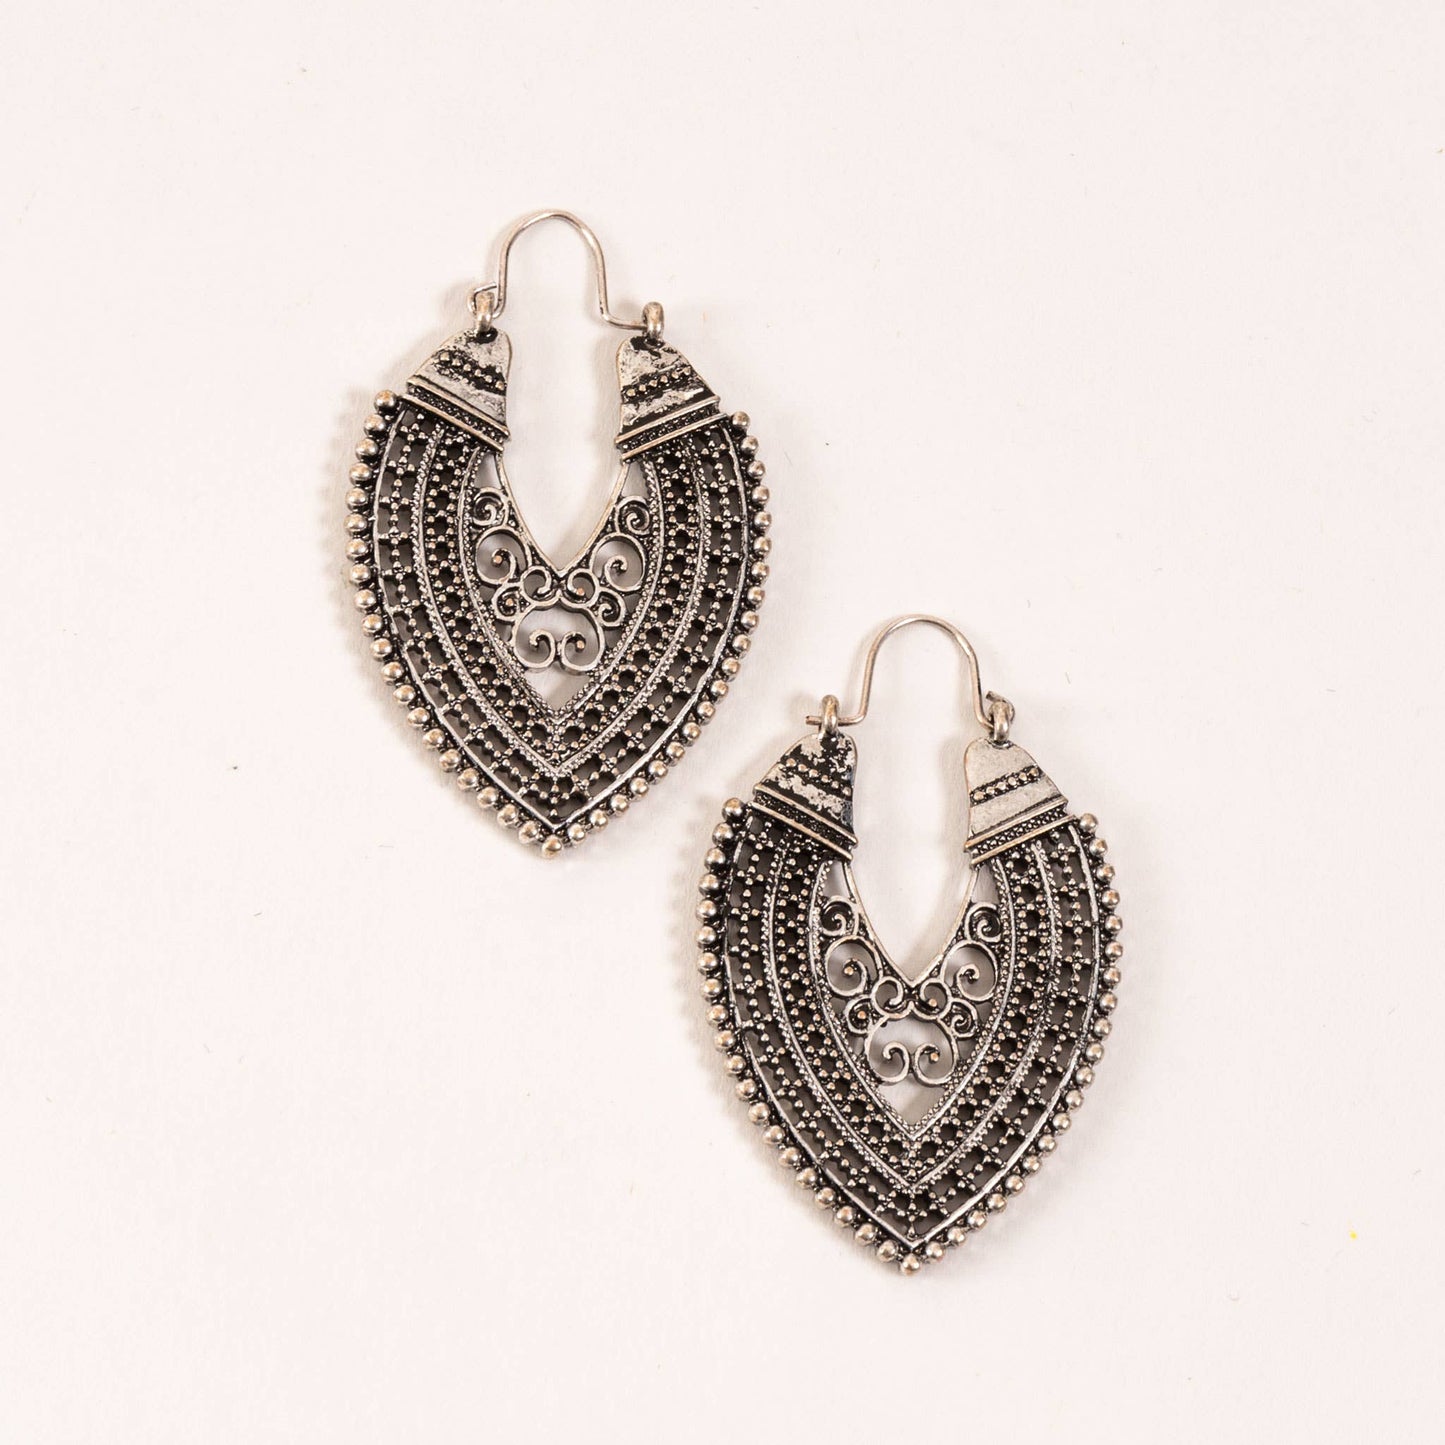 Antique Burnished Silver Heart Earrings